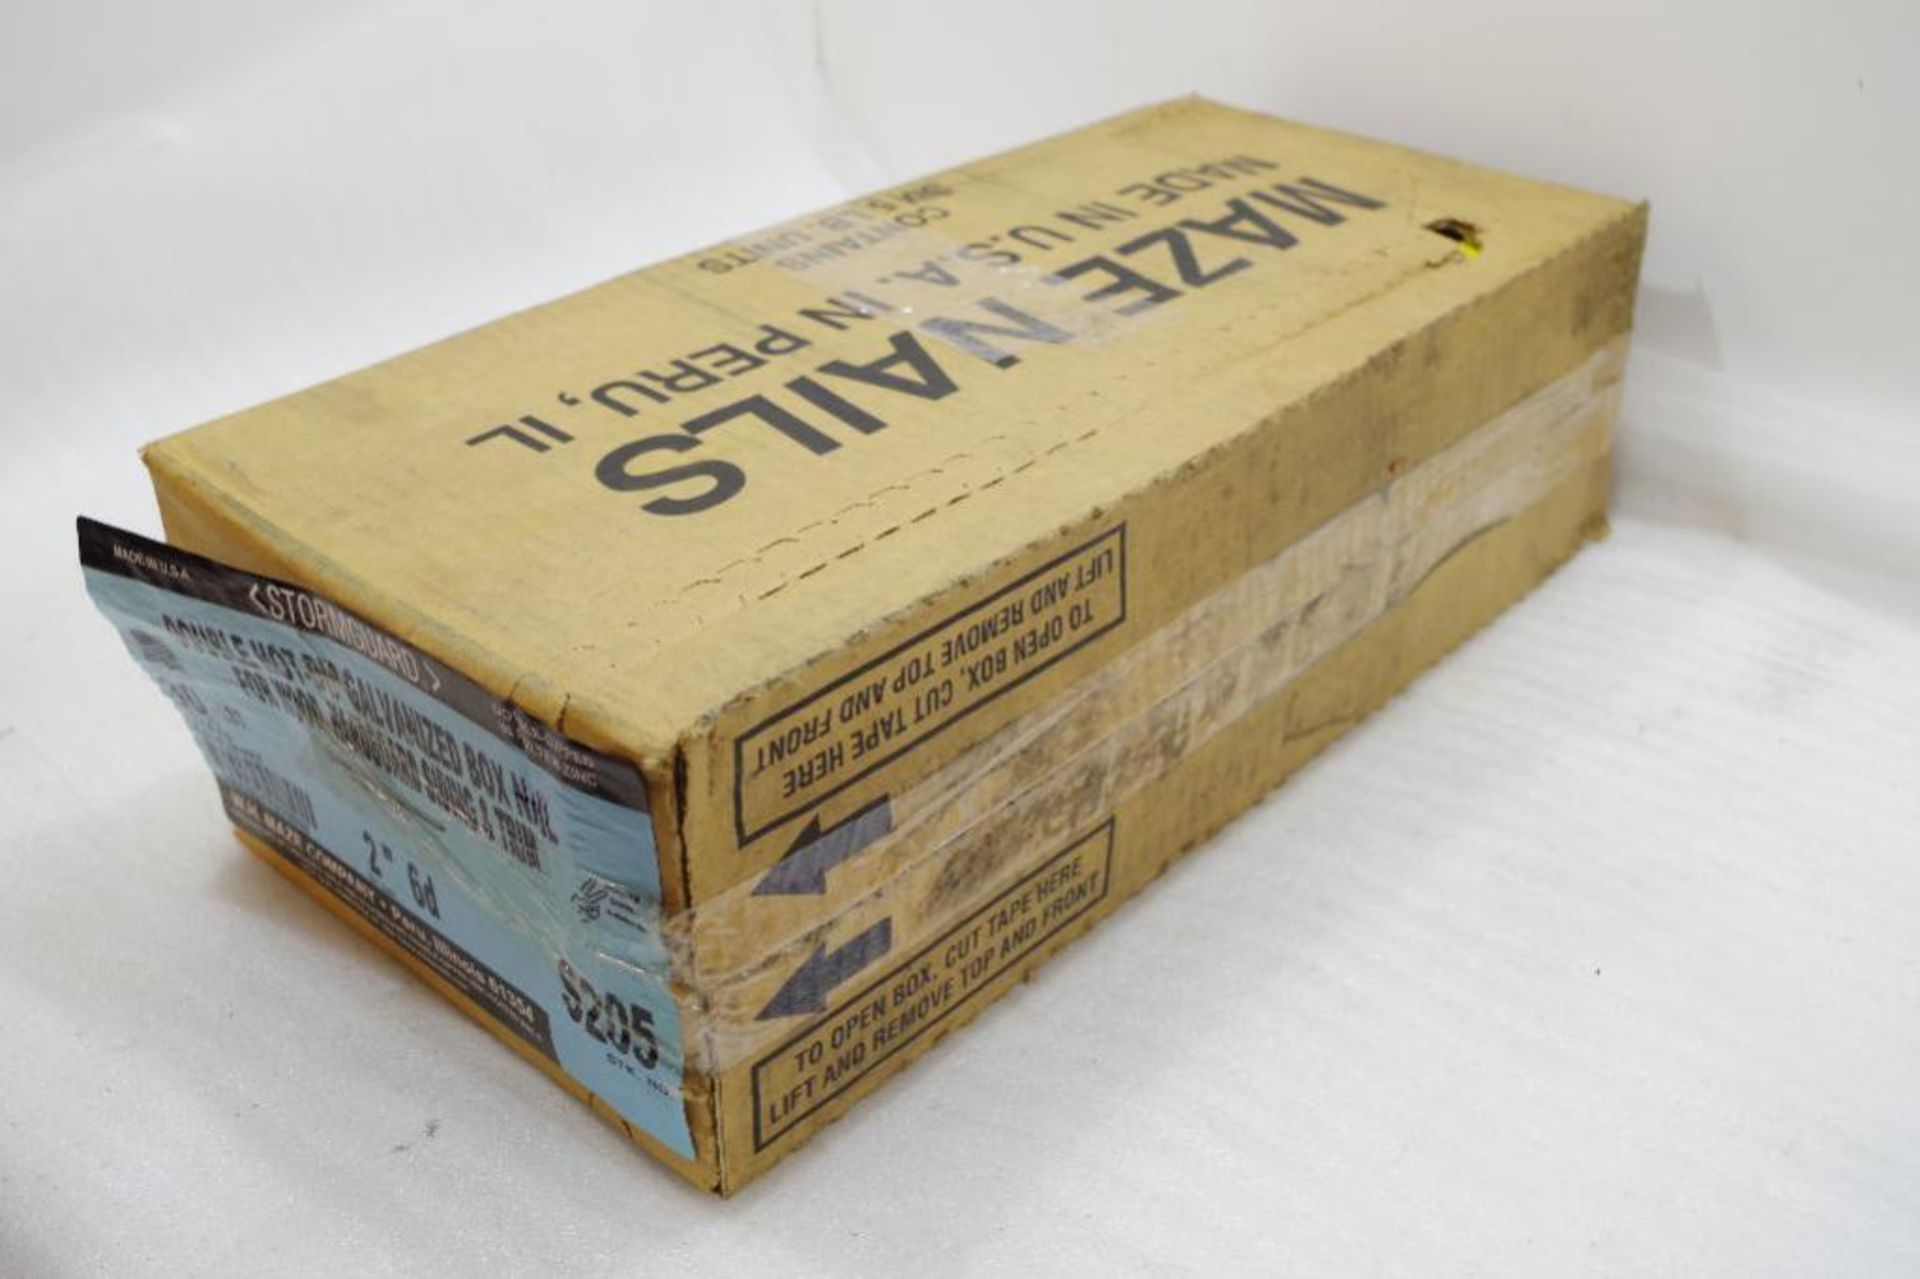 (30) Lbs. MAZE Stormguard Hot-Dip Galvanized Box Nail 2" 6d M/N S205, Made in USA (6 Boxes 5 Lbs.) - Image 5 of 7